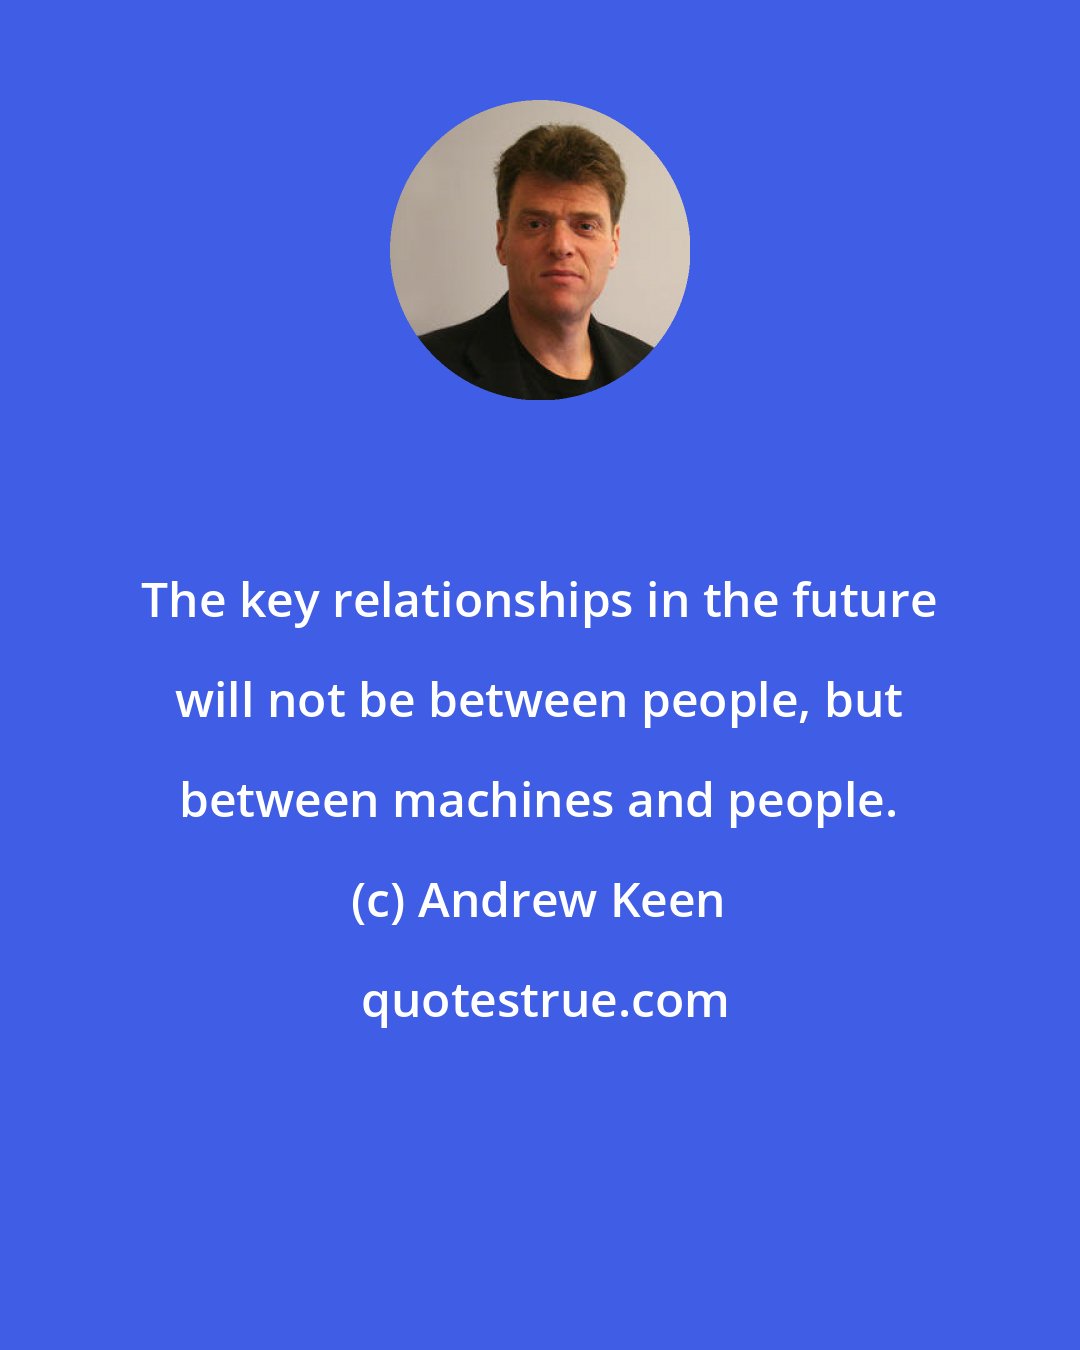 Andrew Keen: The key relationships in the future will not be between people, but between machines and people.